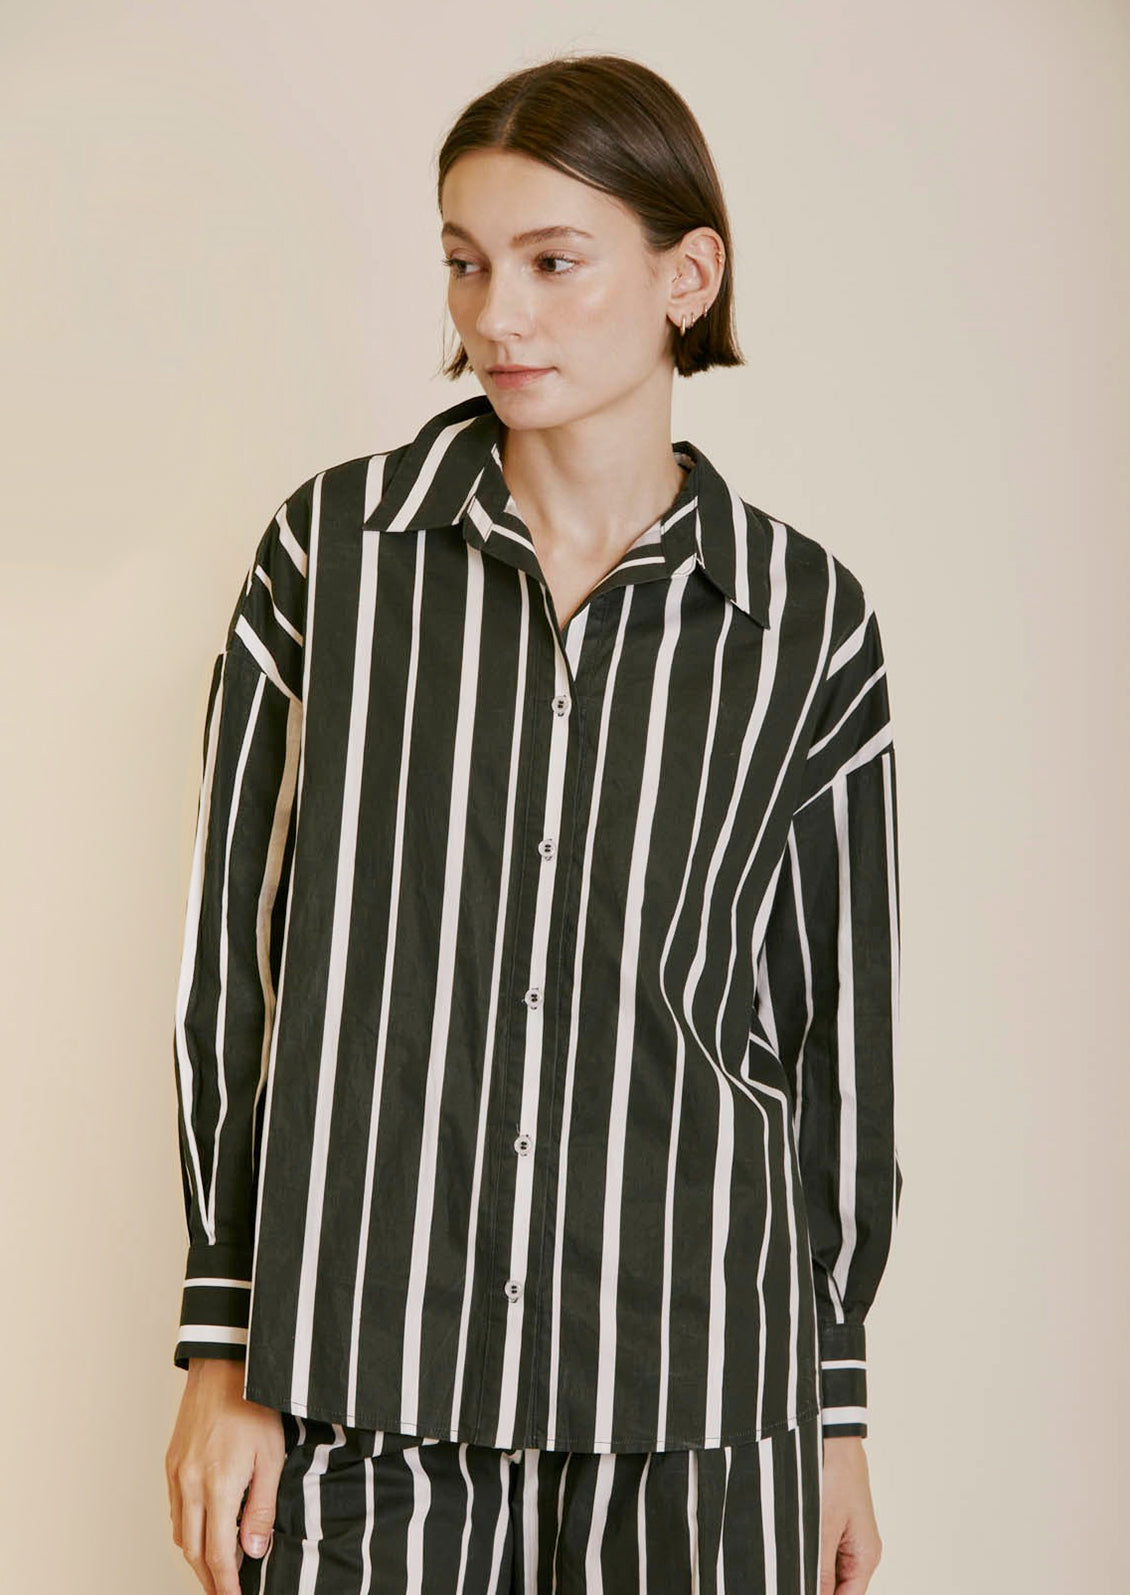 A poplin button front shirt in black with white stripes in varying widths.